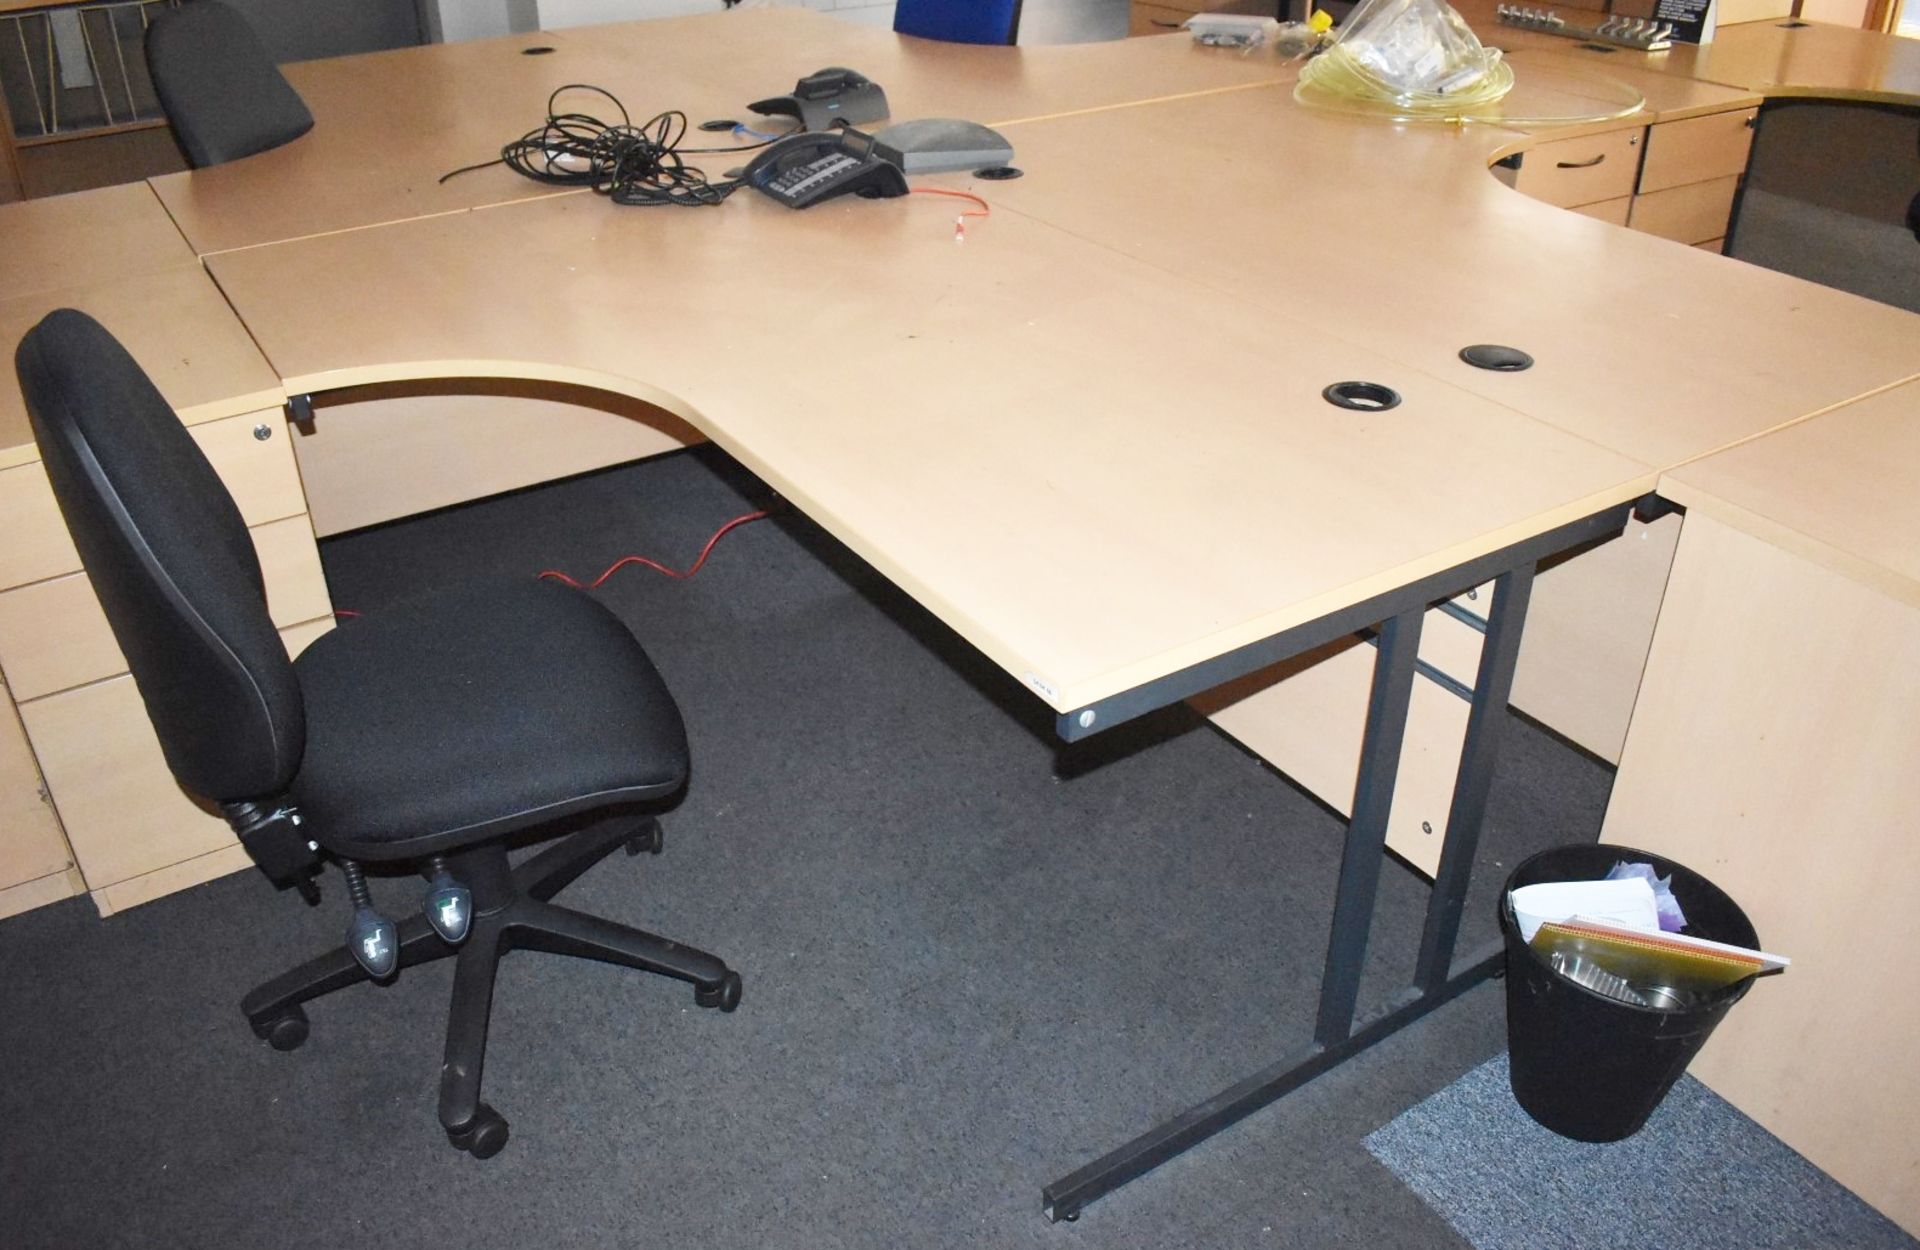 Set of 4 x Beech Office Desks With 4 x Drawer Pedestals - Includes 2 Left Hand and 2 Right Hand - Image 2 of 6